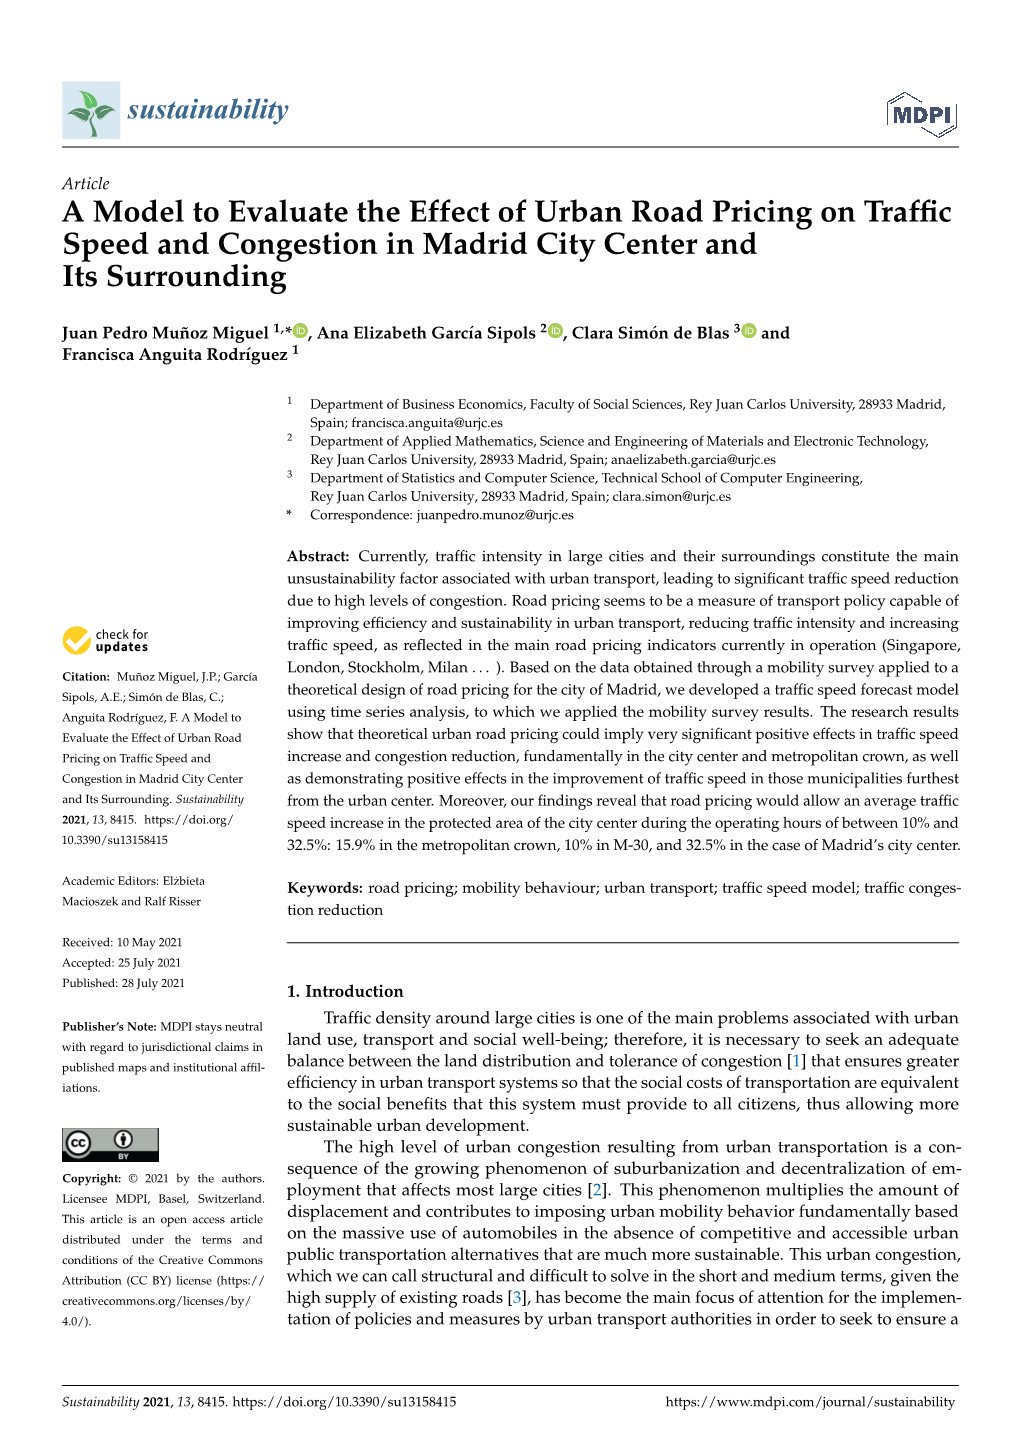 A Model to Evaluate the Effect of Urban Road Pricing on Traffic